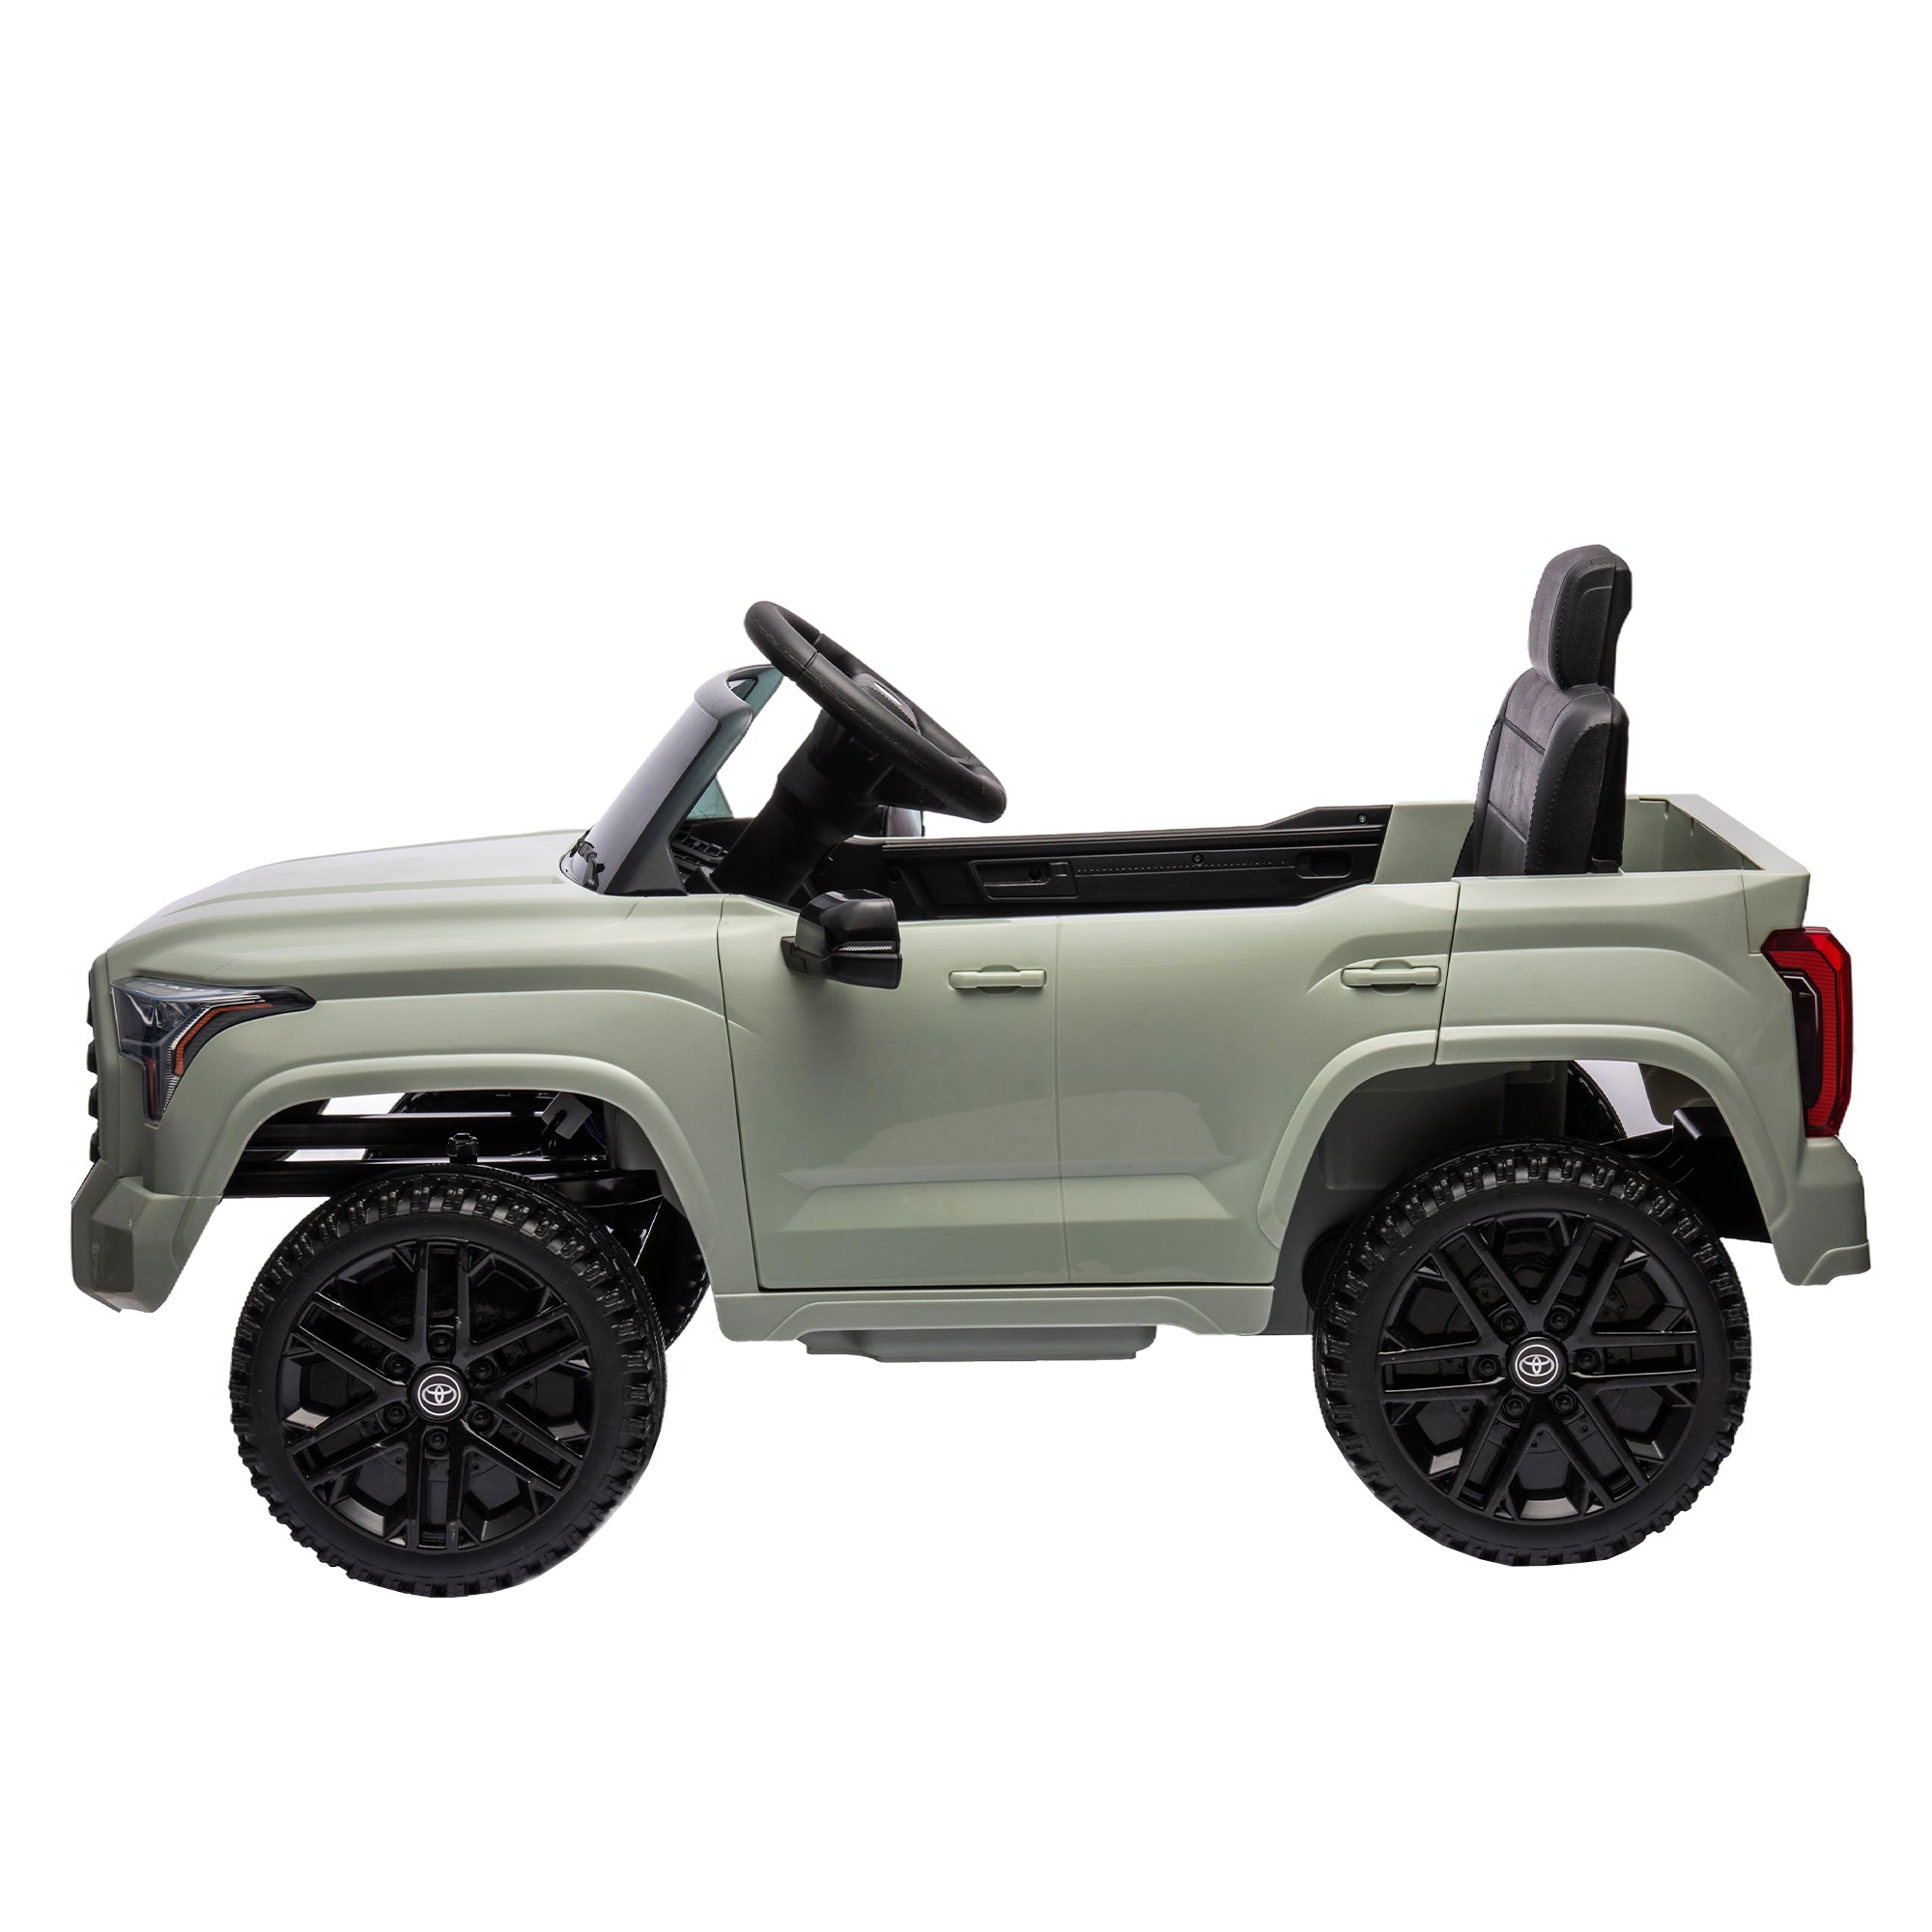 Officially Licensed Toyota Tundra Pickup,electric olive-plastic